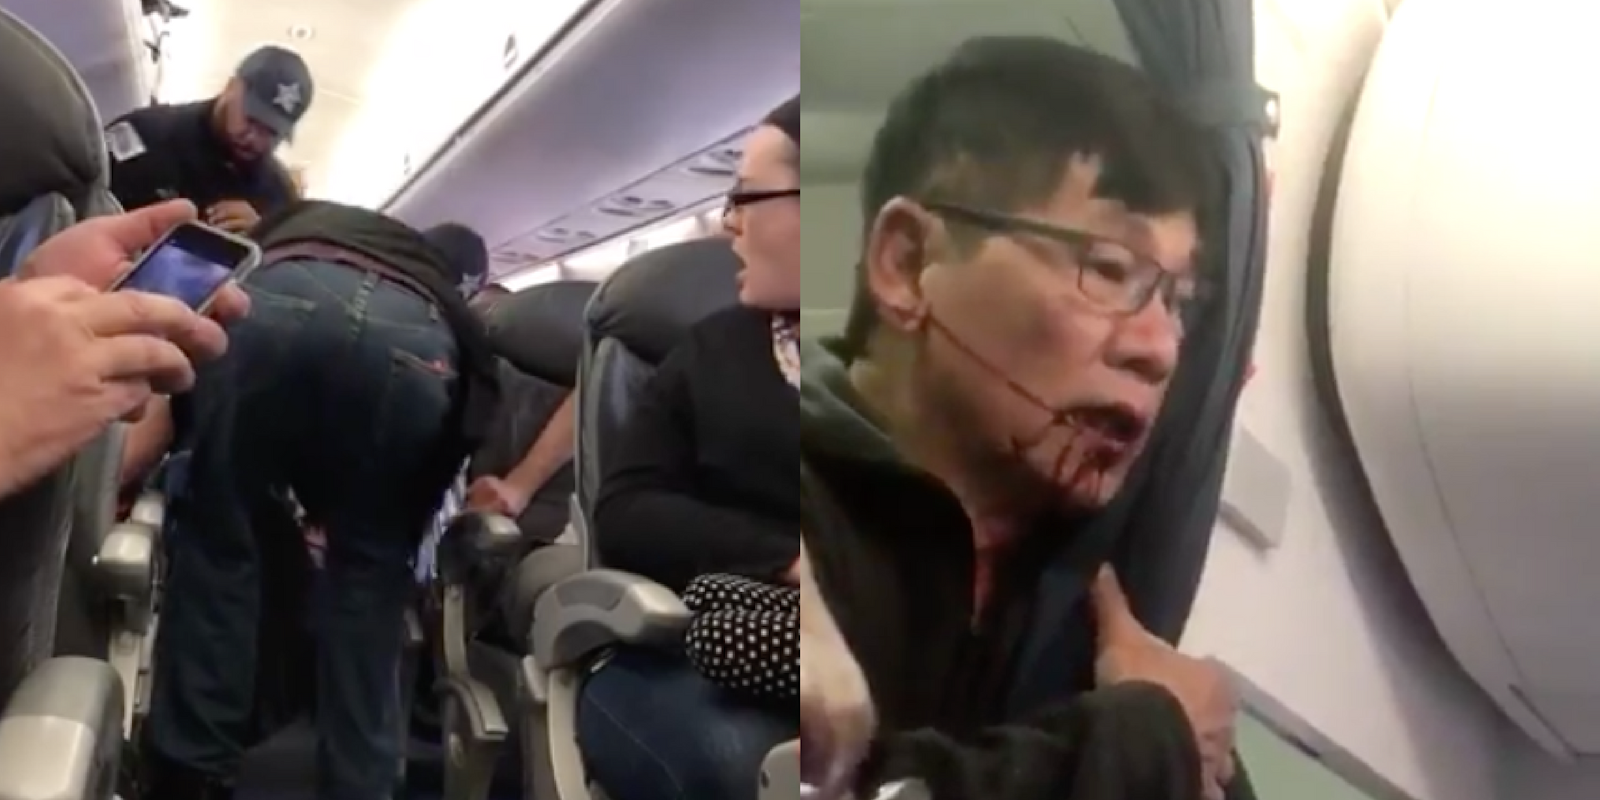 Video stills of the United Airlines passenger who was dragged off an airplane.